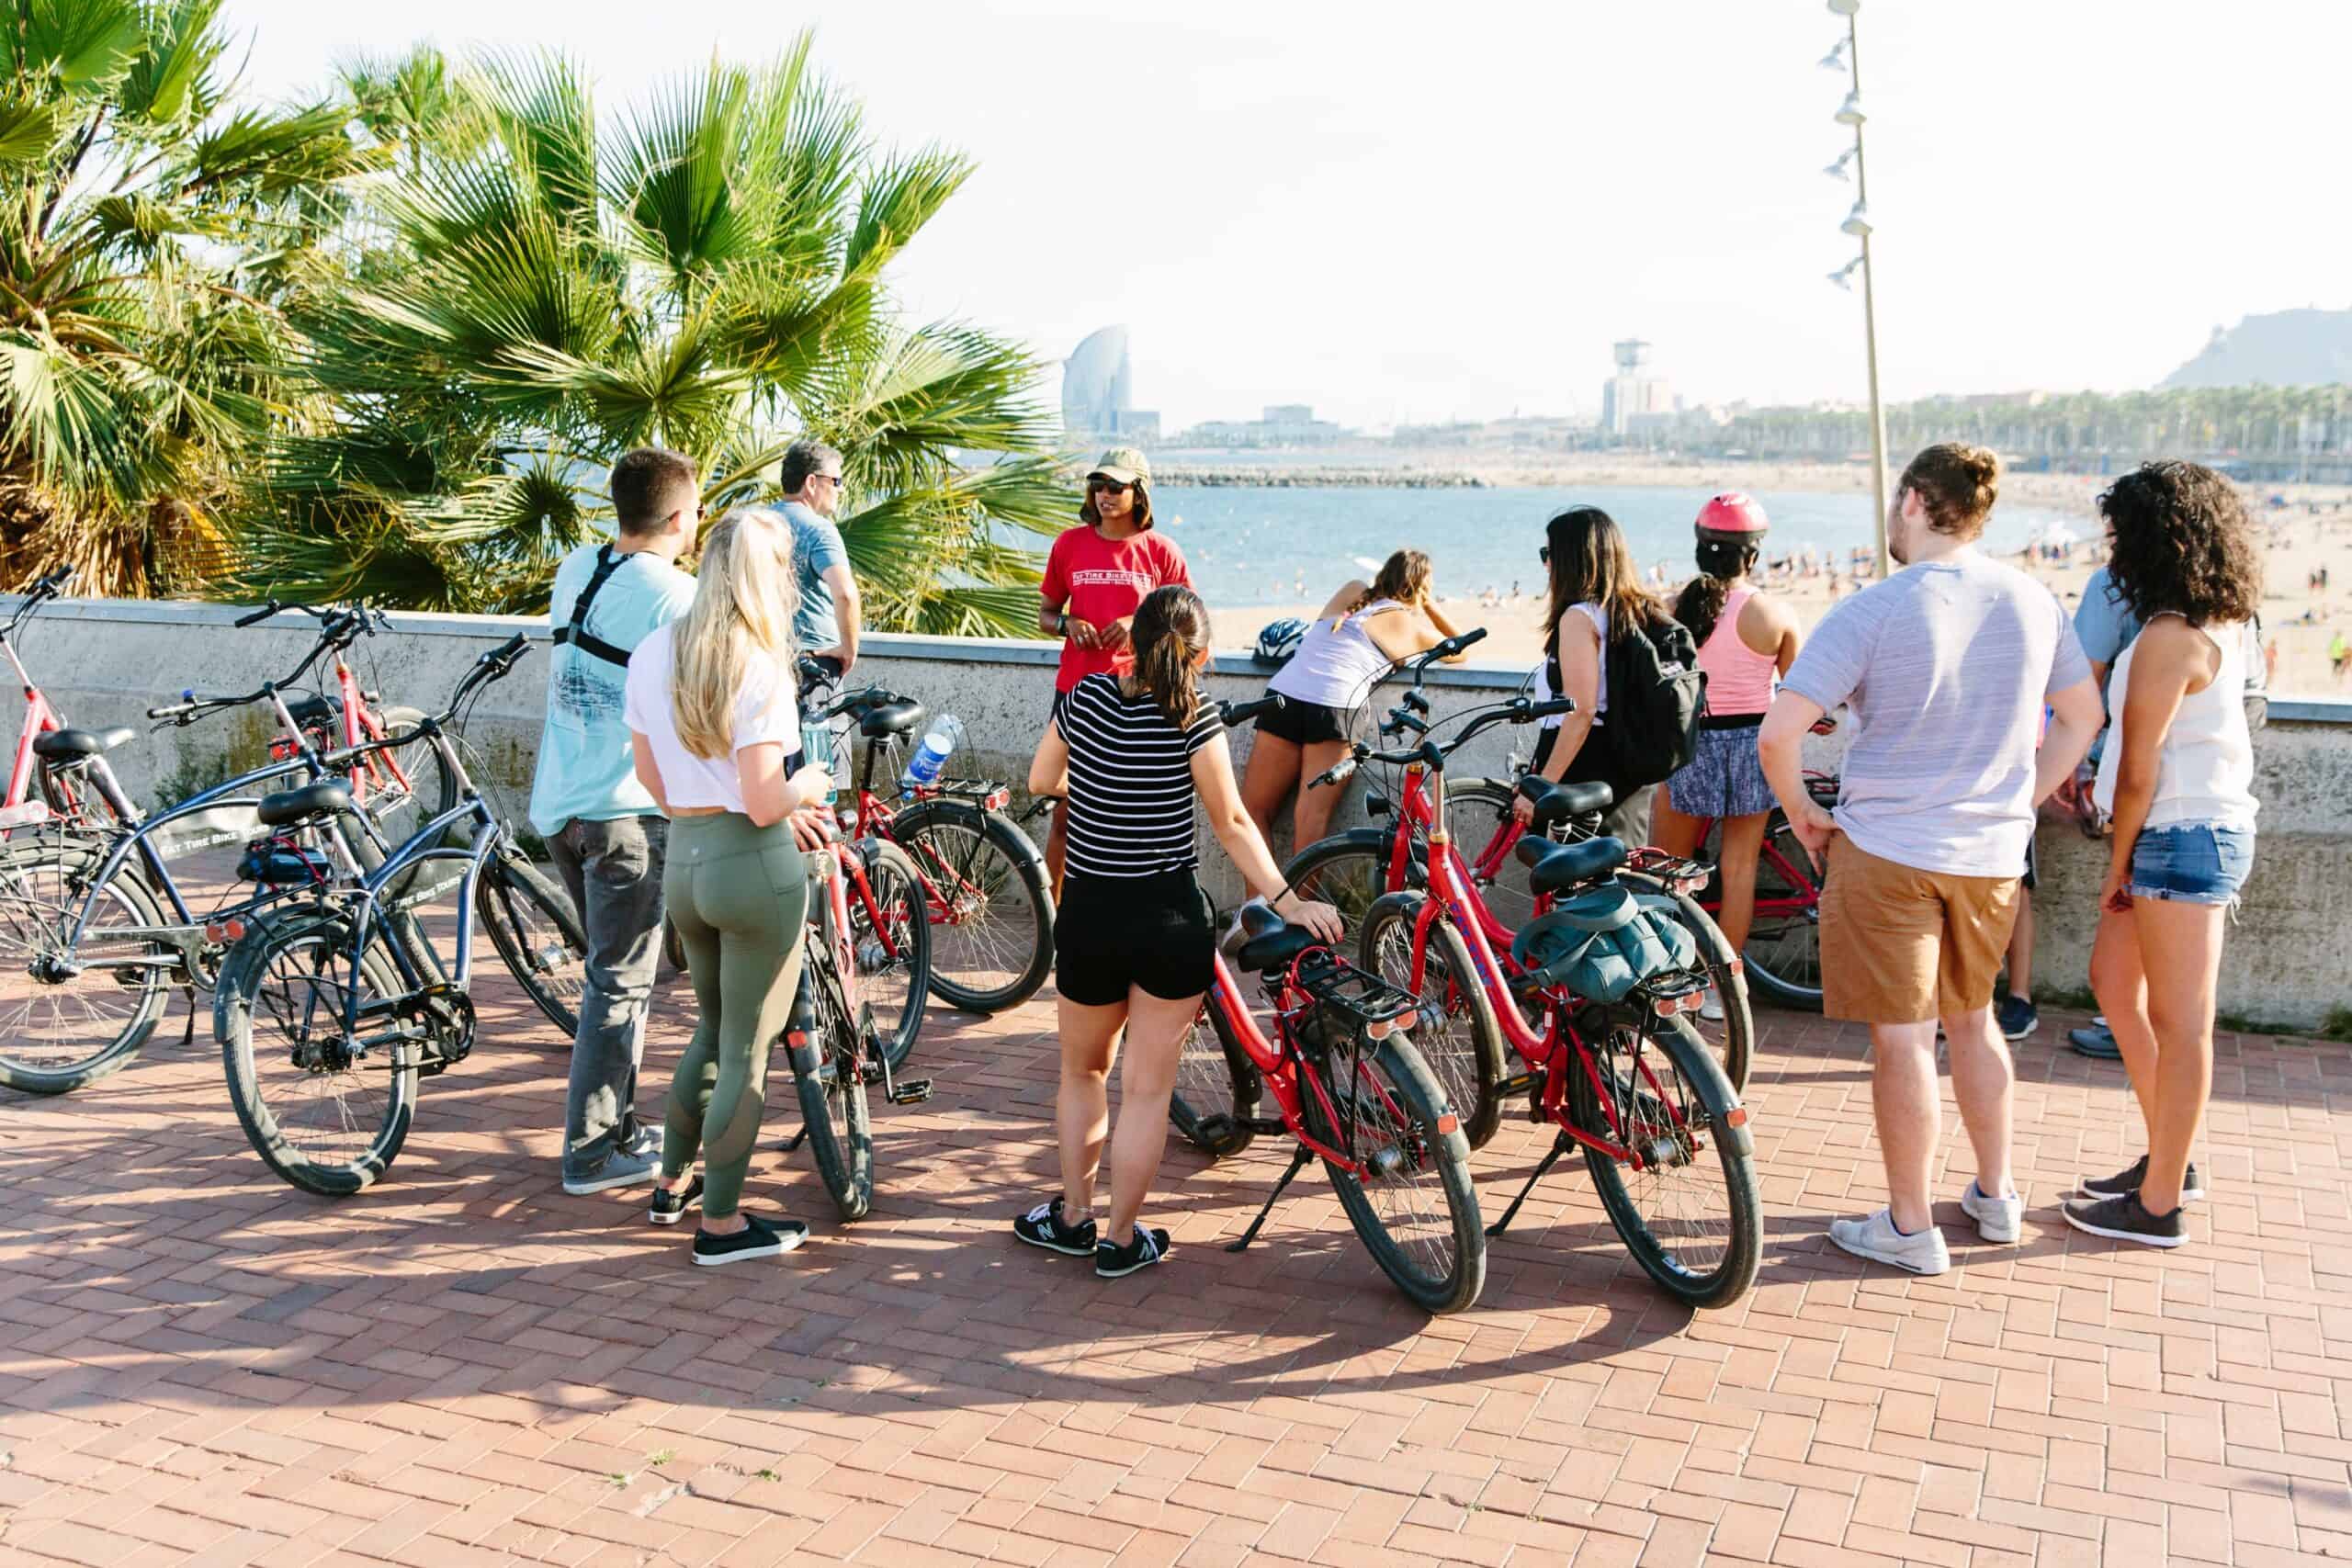 A group listens to the guide with their bikes at the end of the Barceloneta Beach